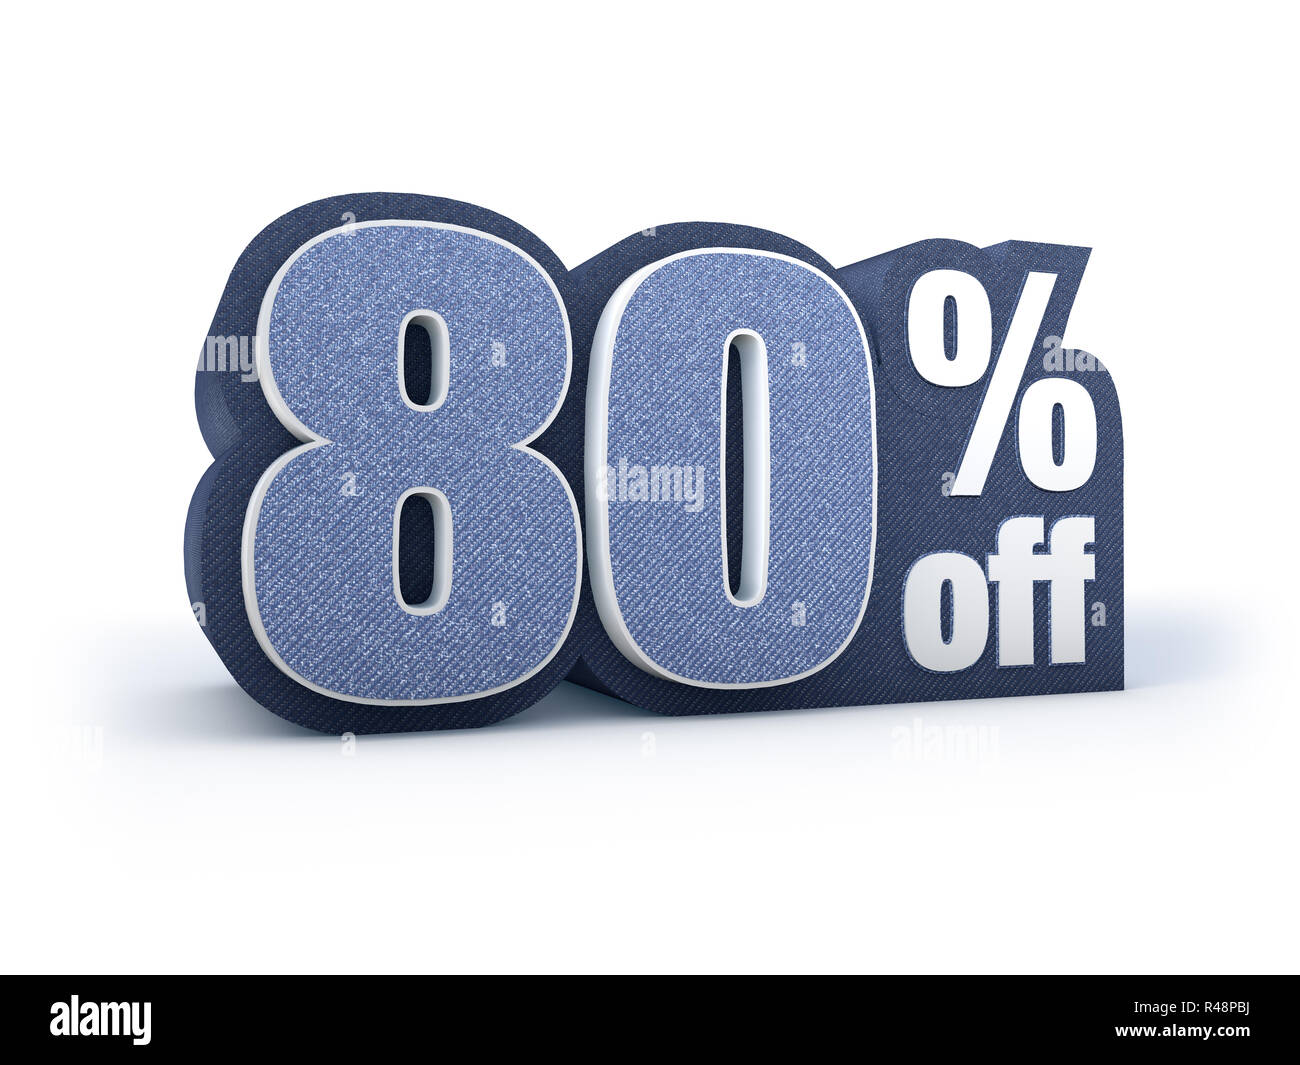 80 percent off denim styled discount price sign Stock Photo